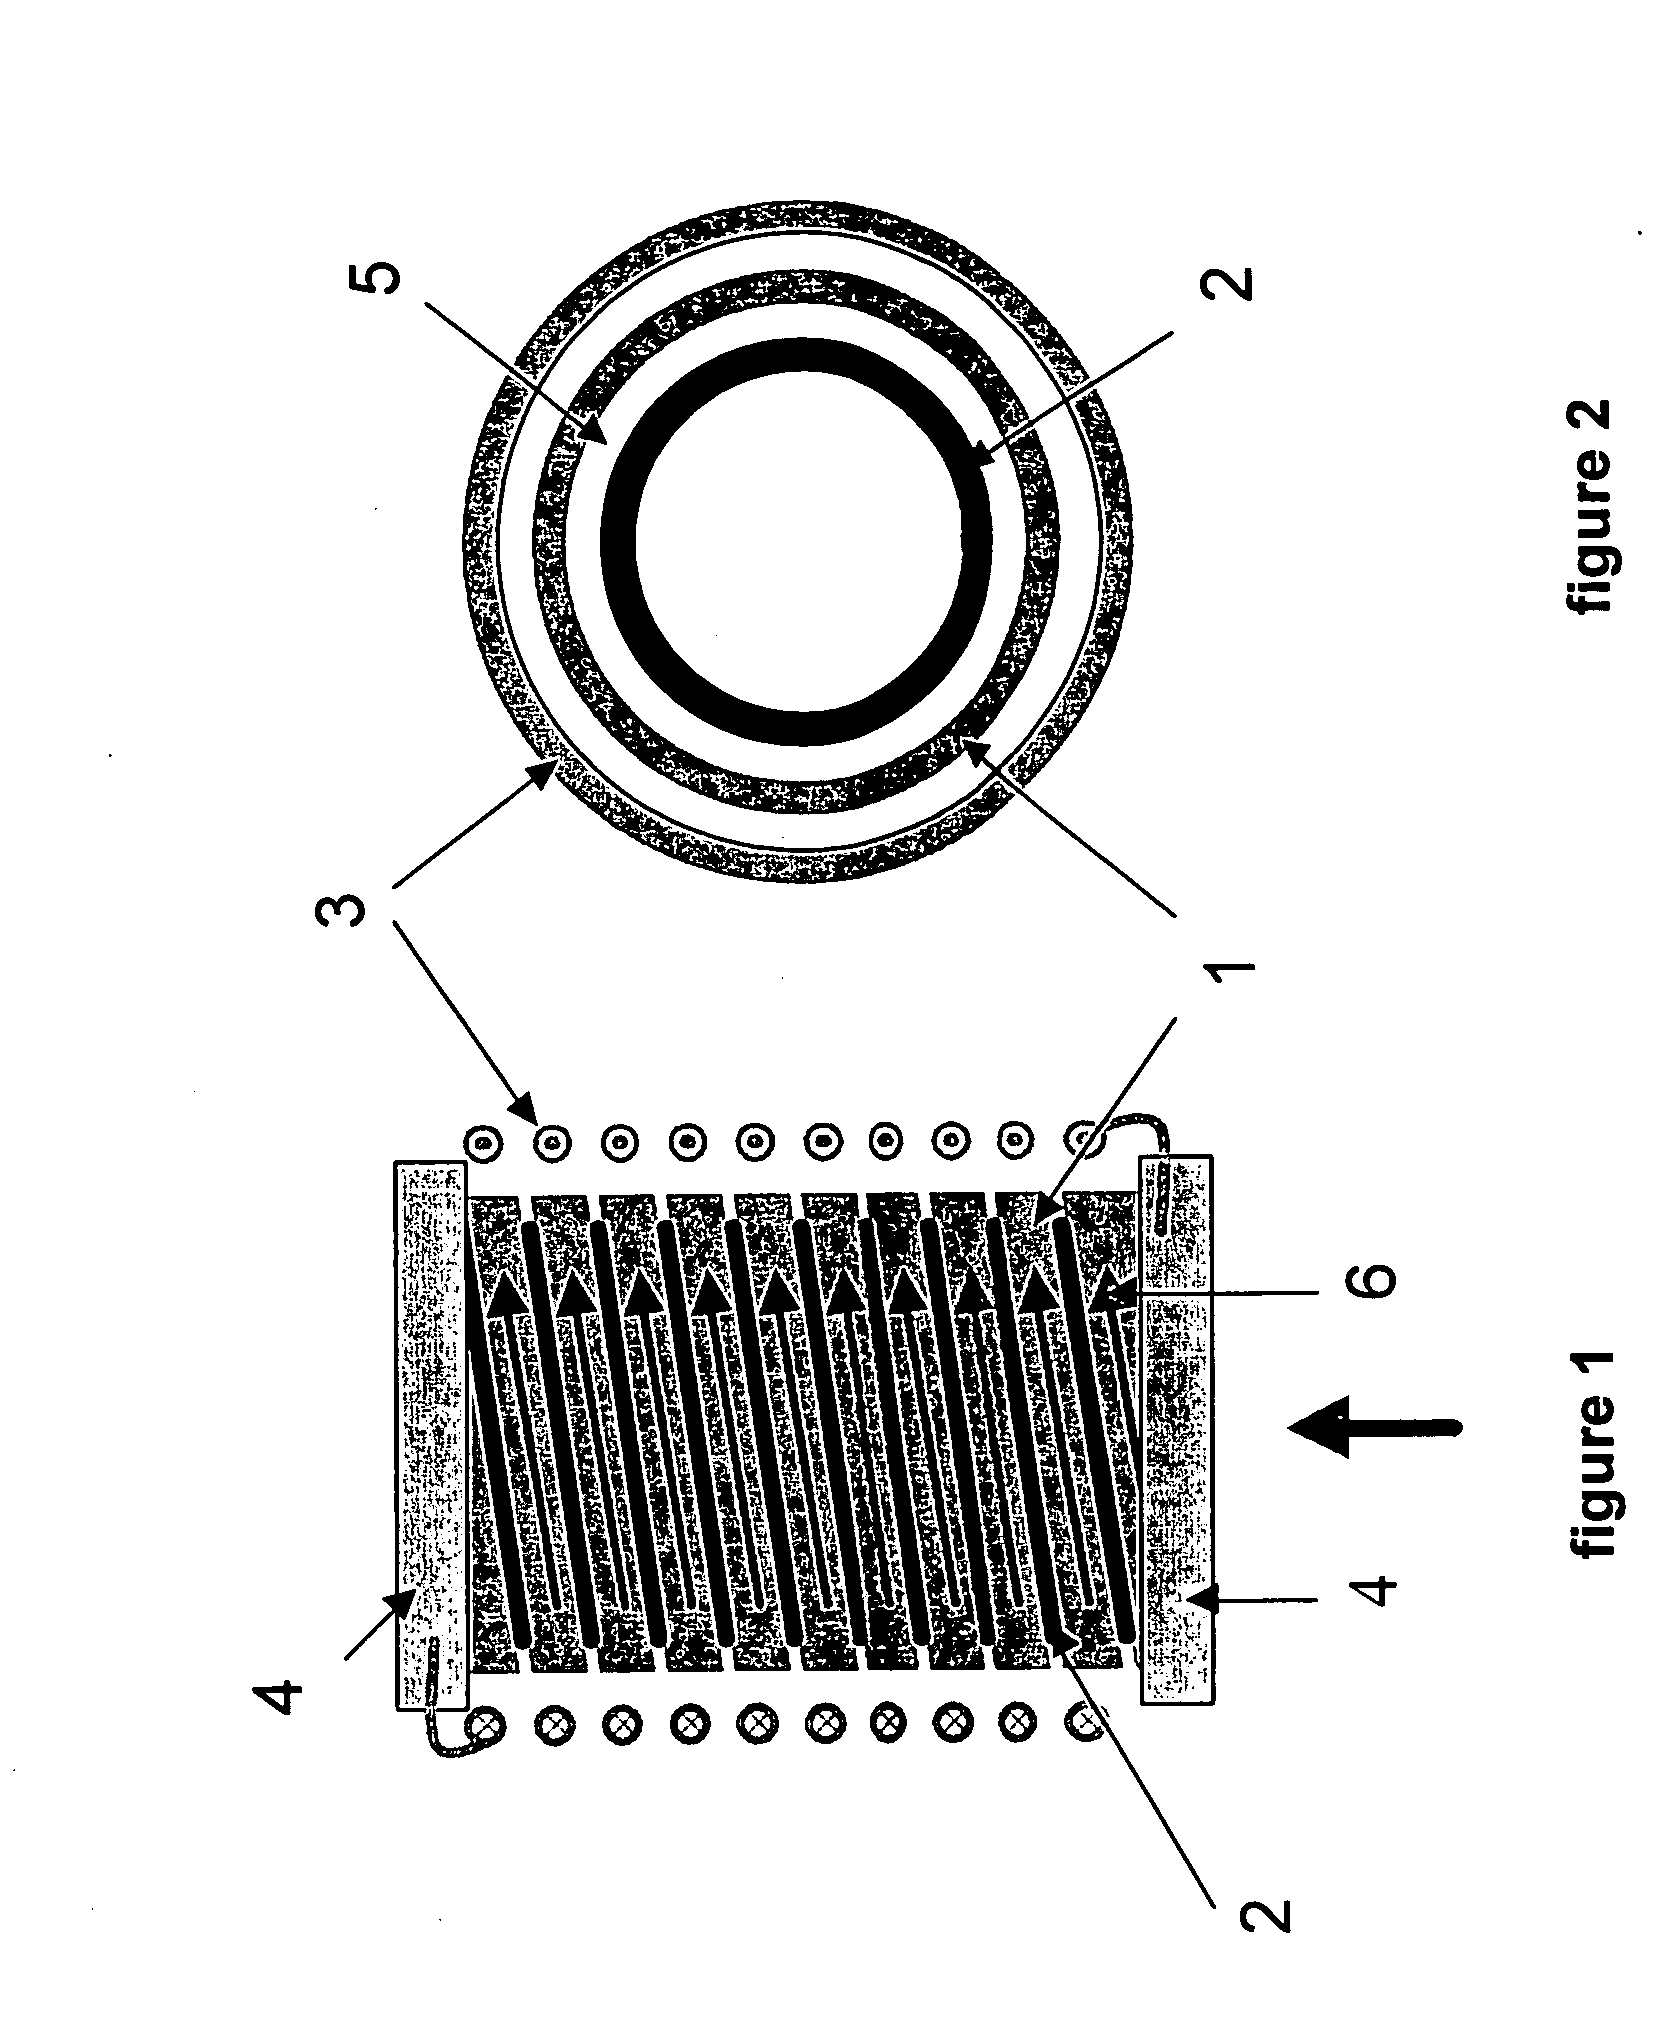 Compact superconducting current limiting component in coil configuration with low inductance